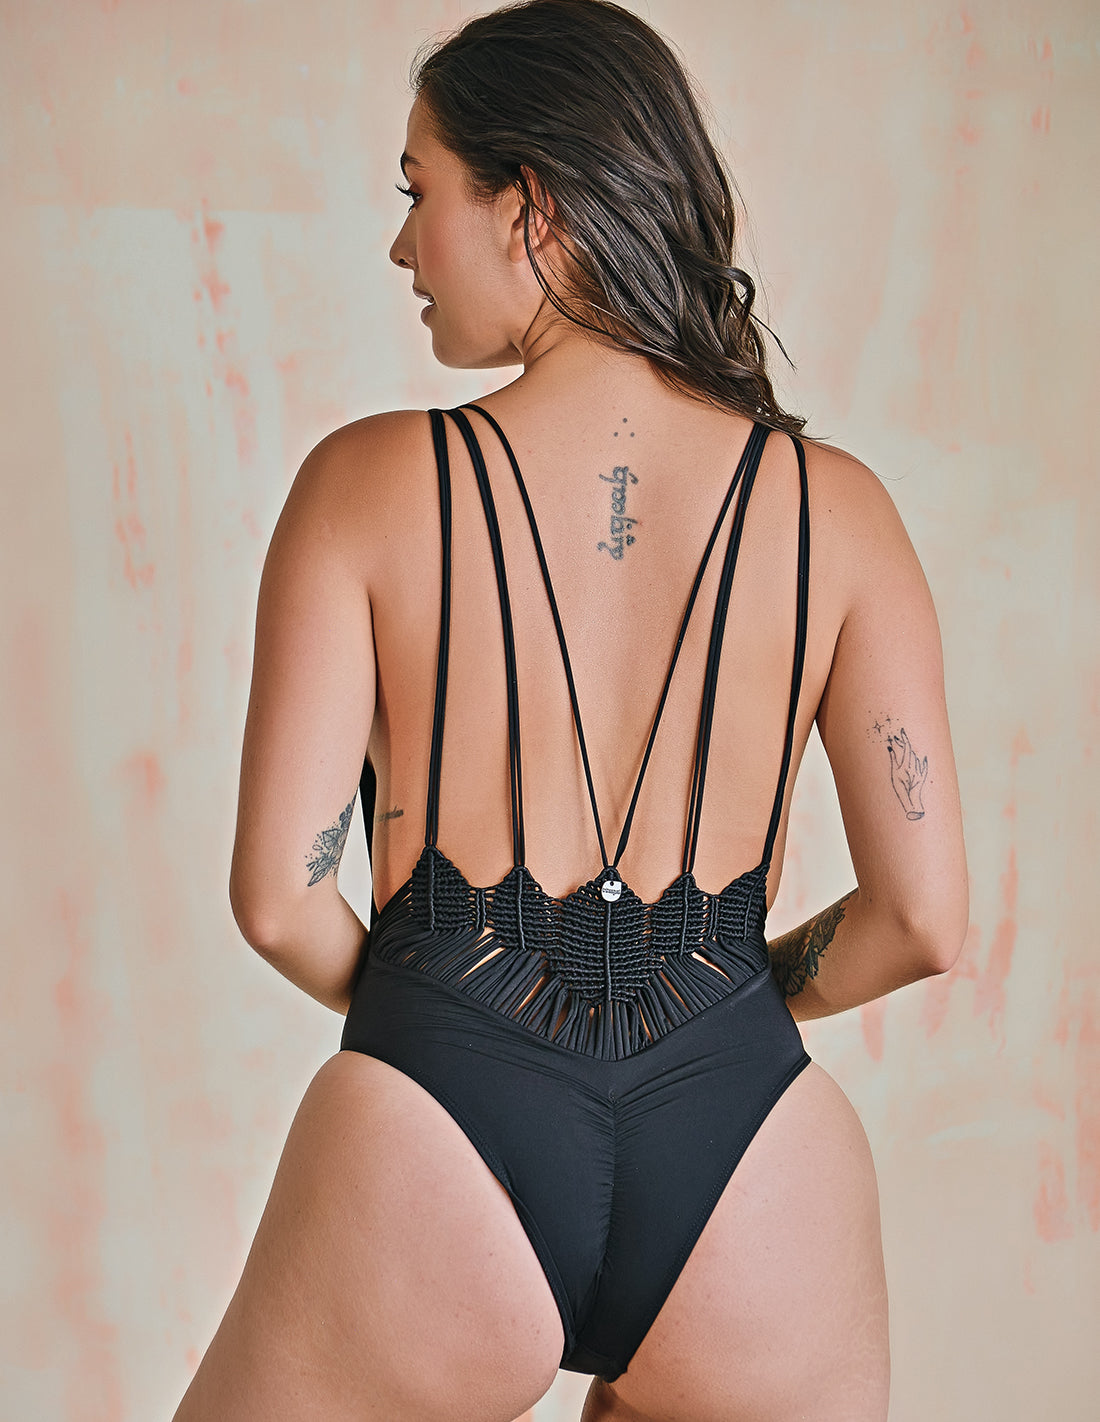 Mirror One Piece Black. One Piece Swimsuit With Hand Woven Macramé In Black. Entreaguas